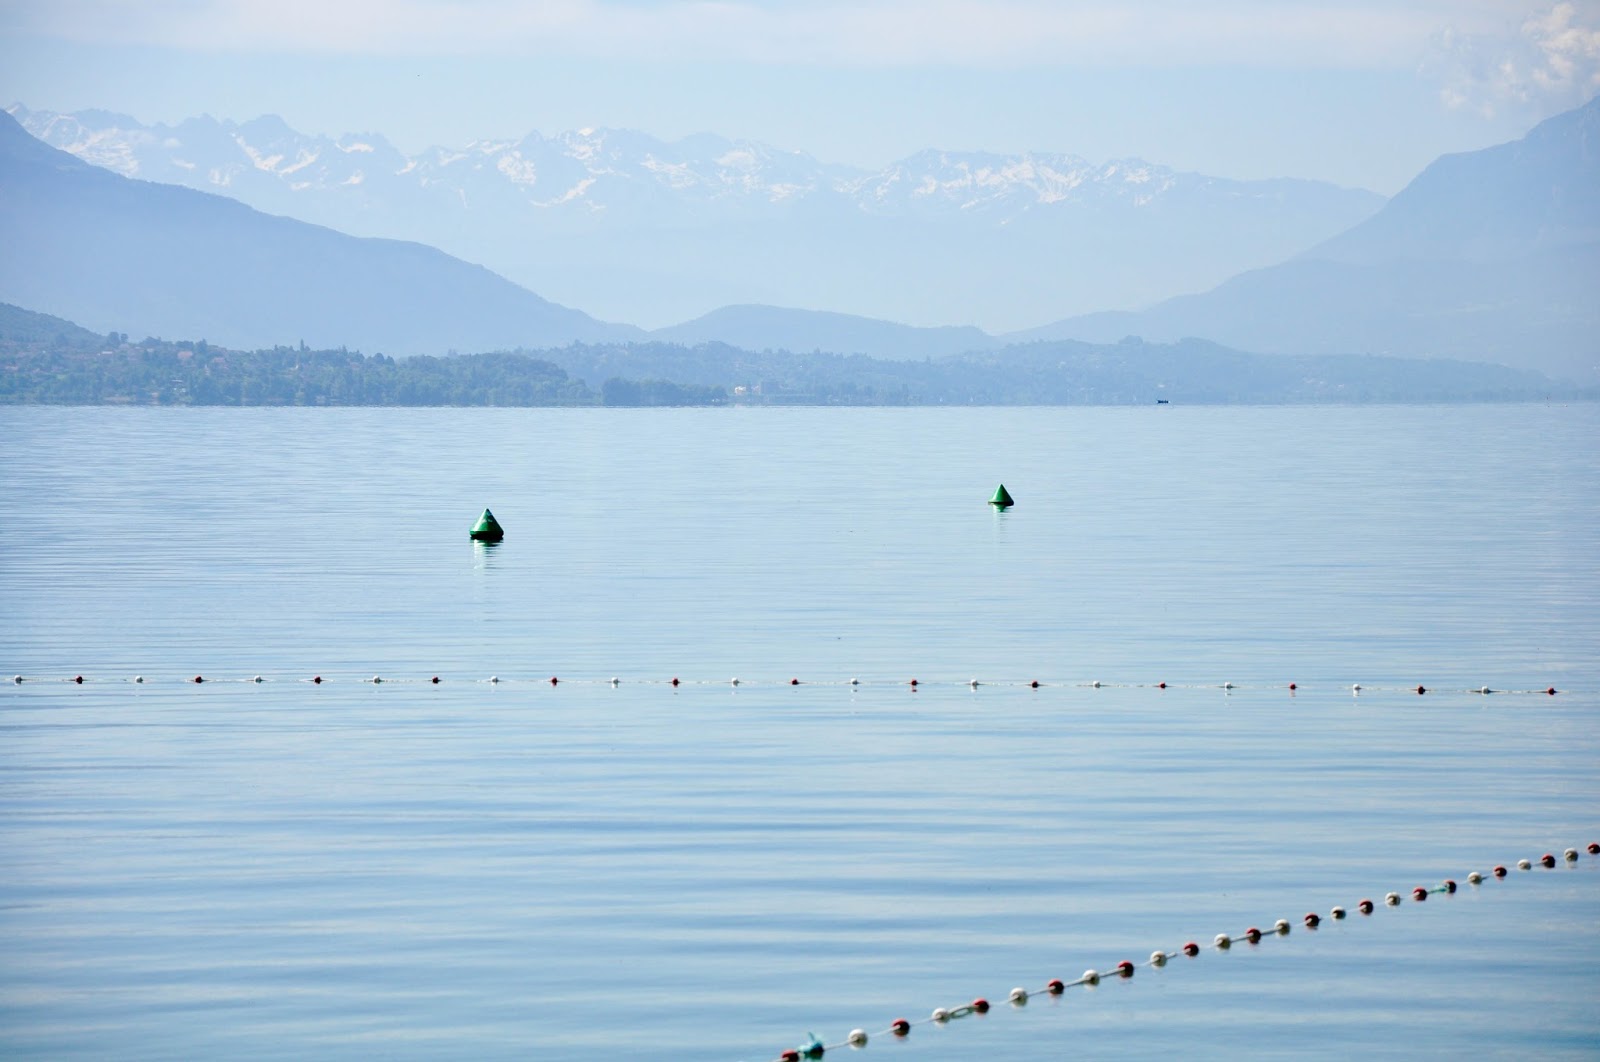 Early in the morning, Lake Bourget, France's largest lake